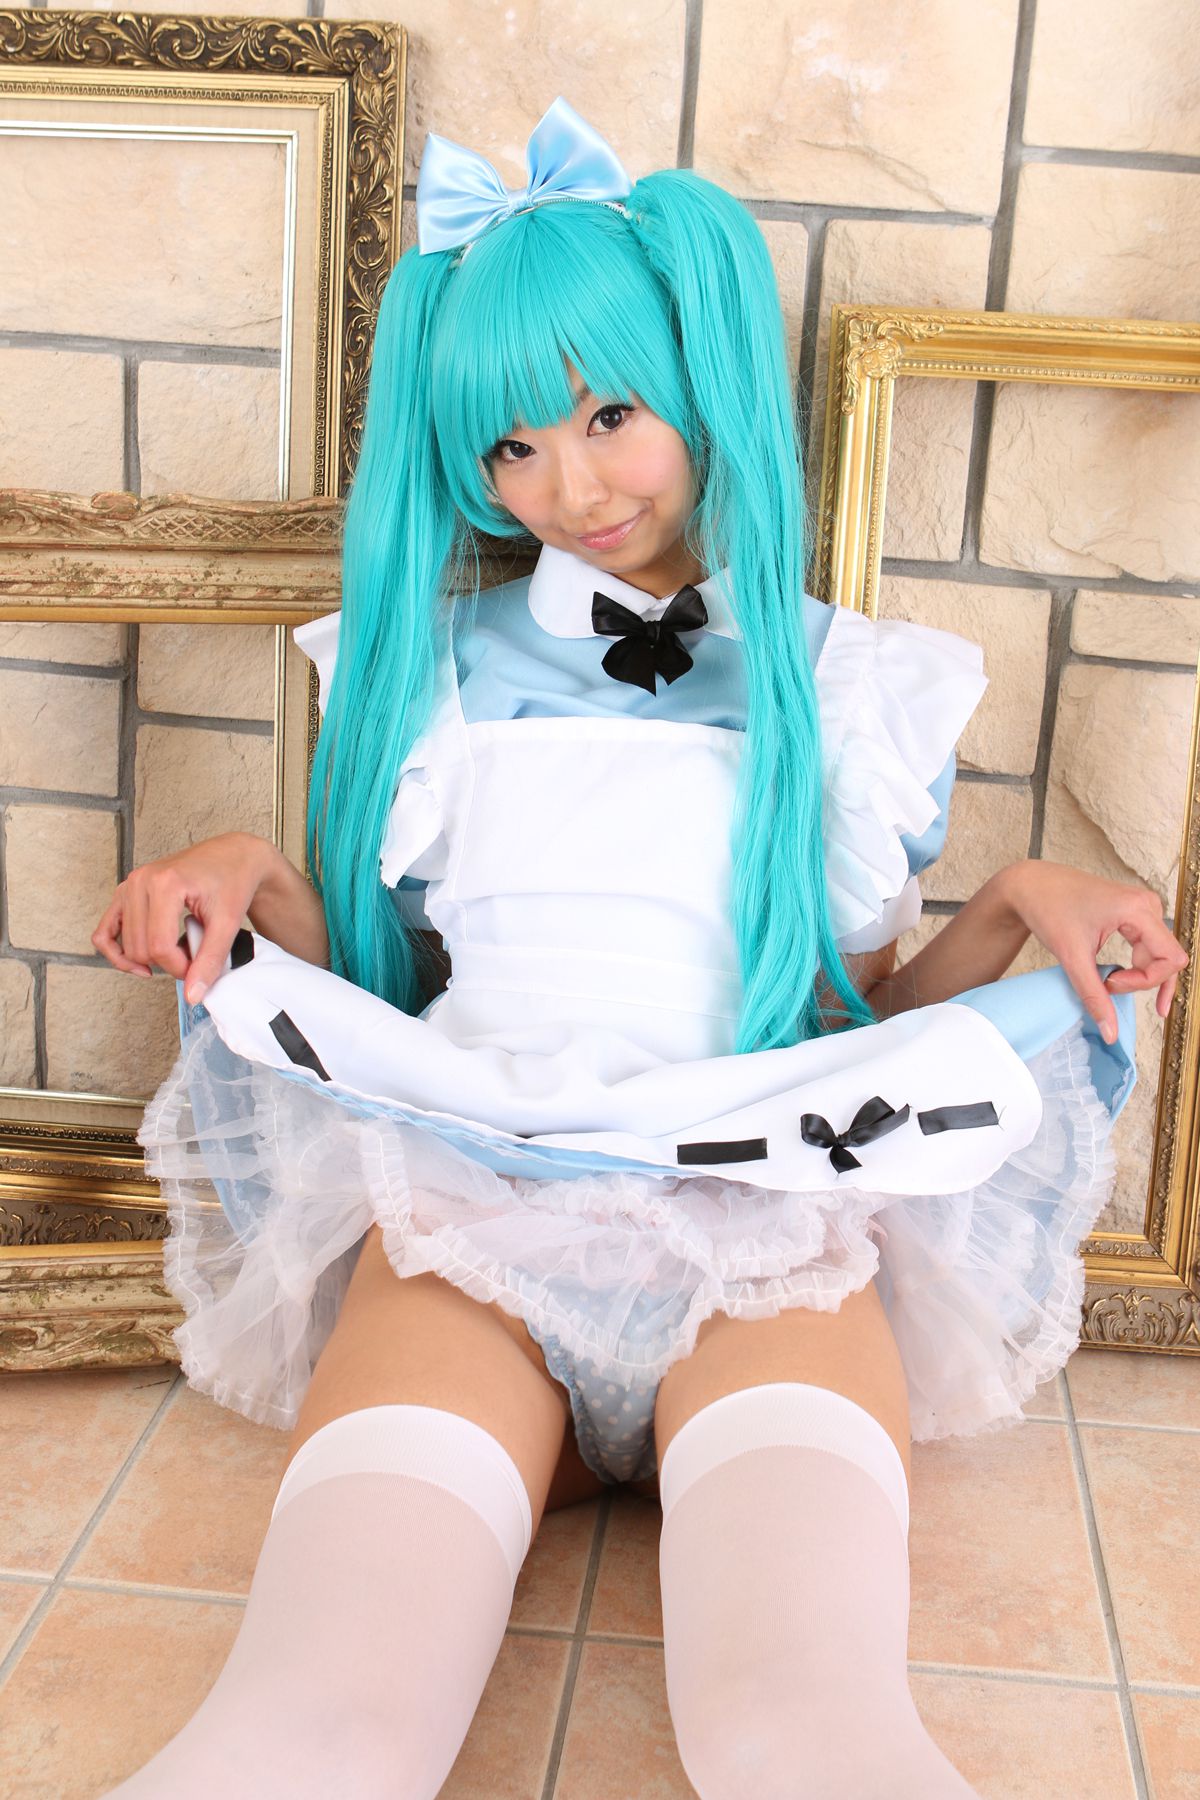 taotuhome[Cosplay套图] New Hatsune Miku from Vocaloid - So Sexy第73张